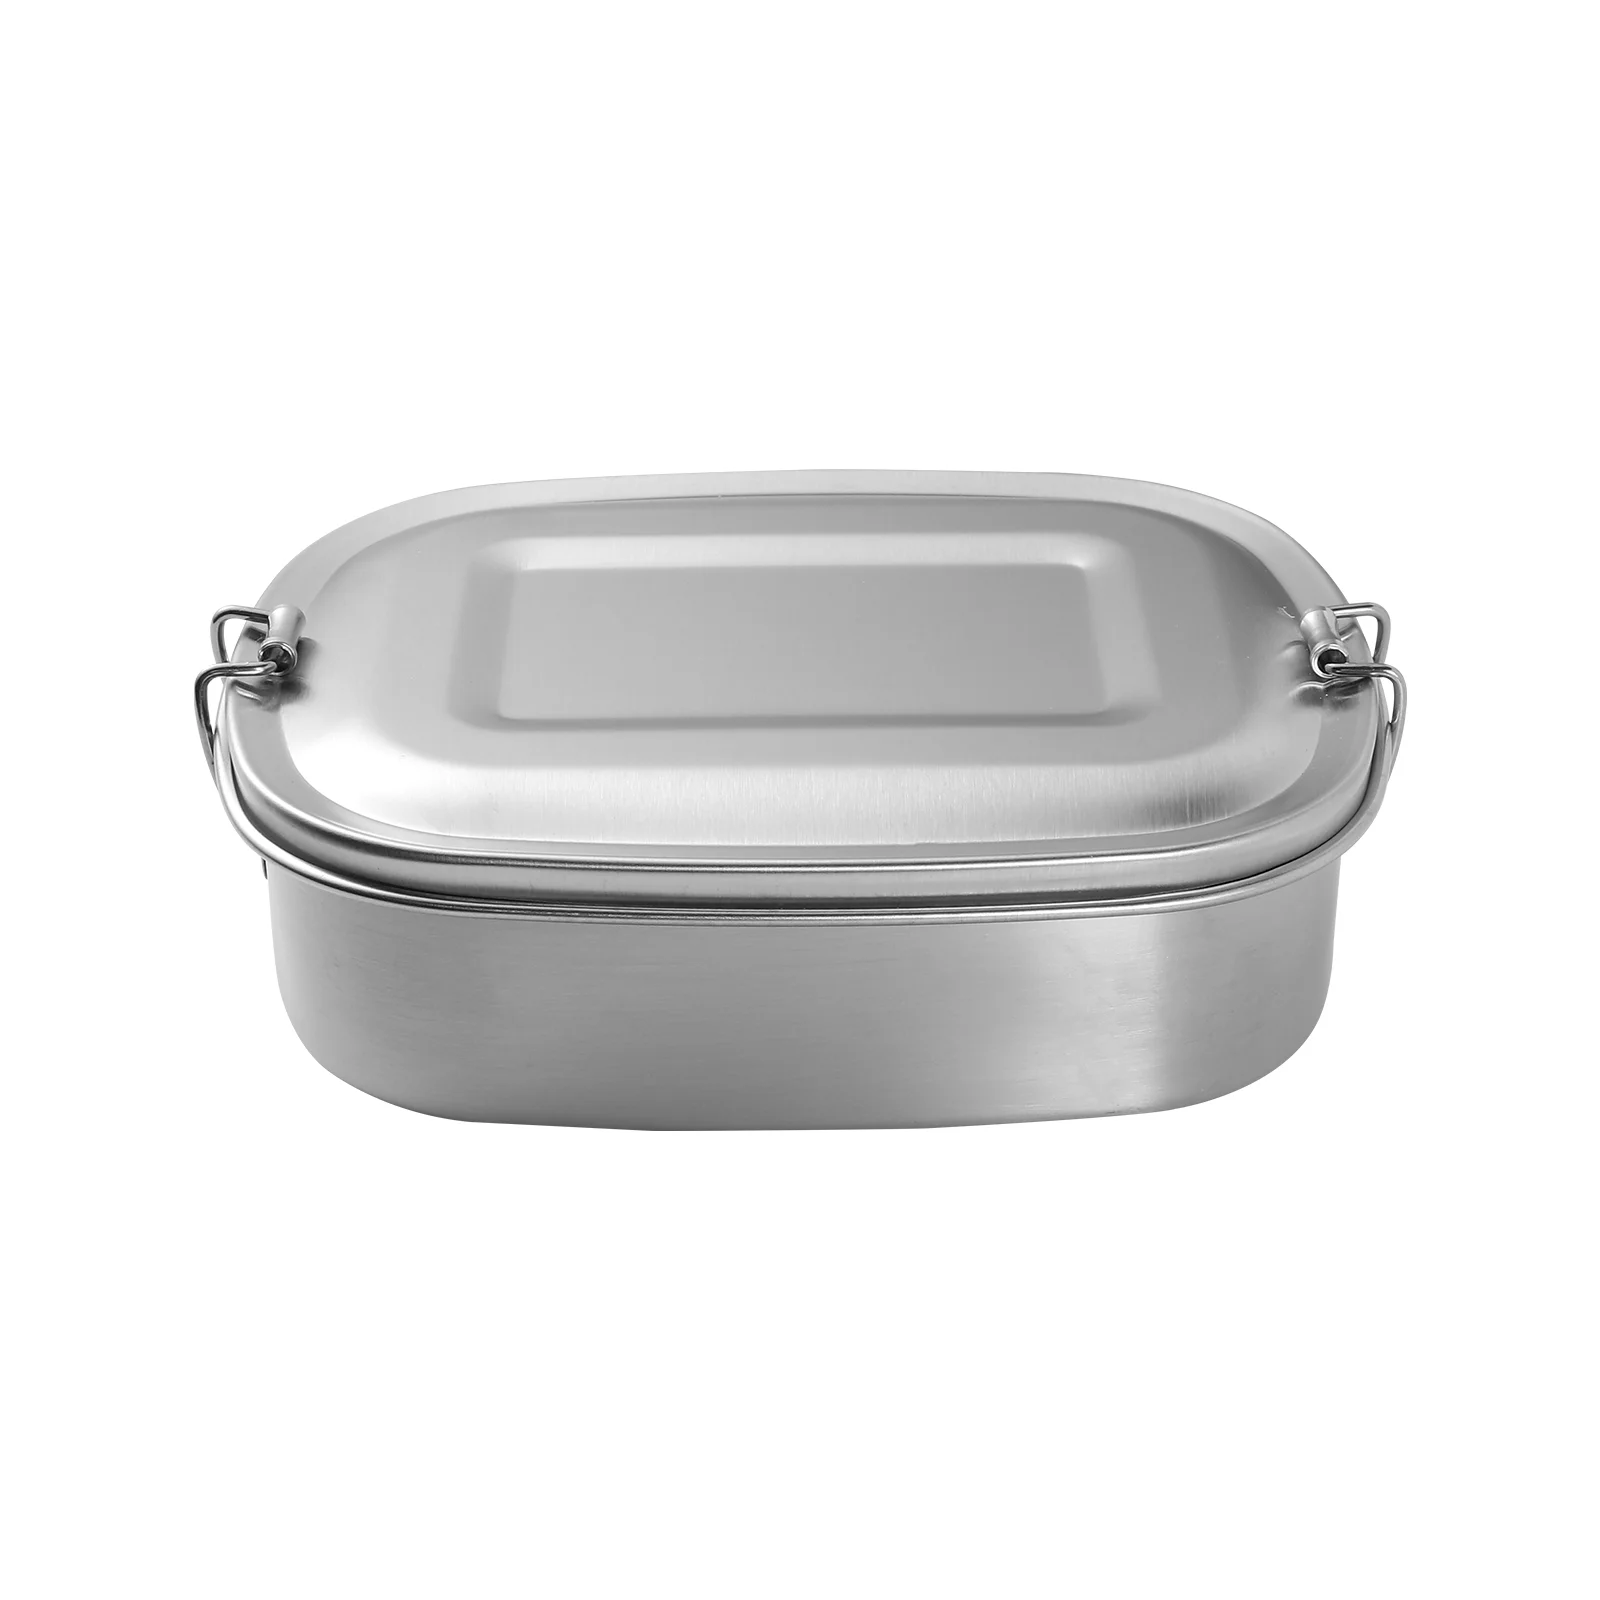 

650 ML Lunch Box Metal Lunchbox Adults Lunch Carrying Bento Aldult School Lunch Bowl Stainless Steel Metal Bento Box Travel